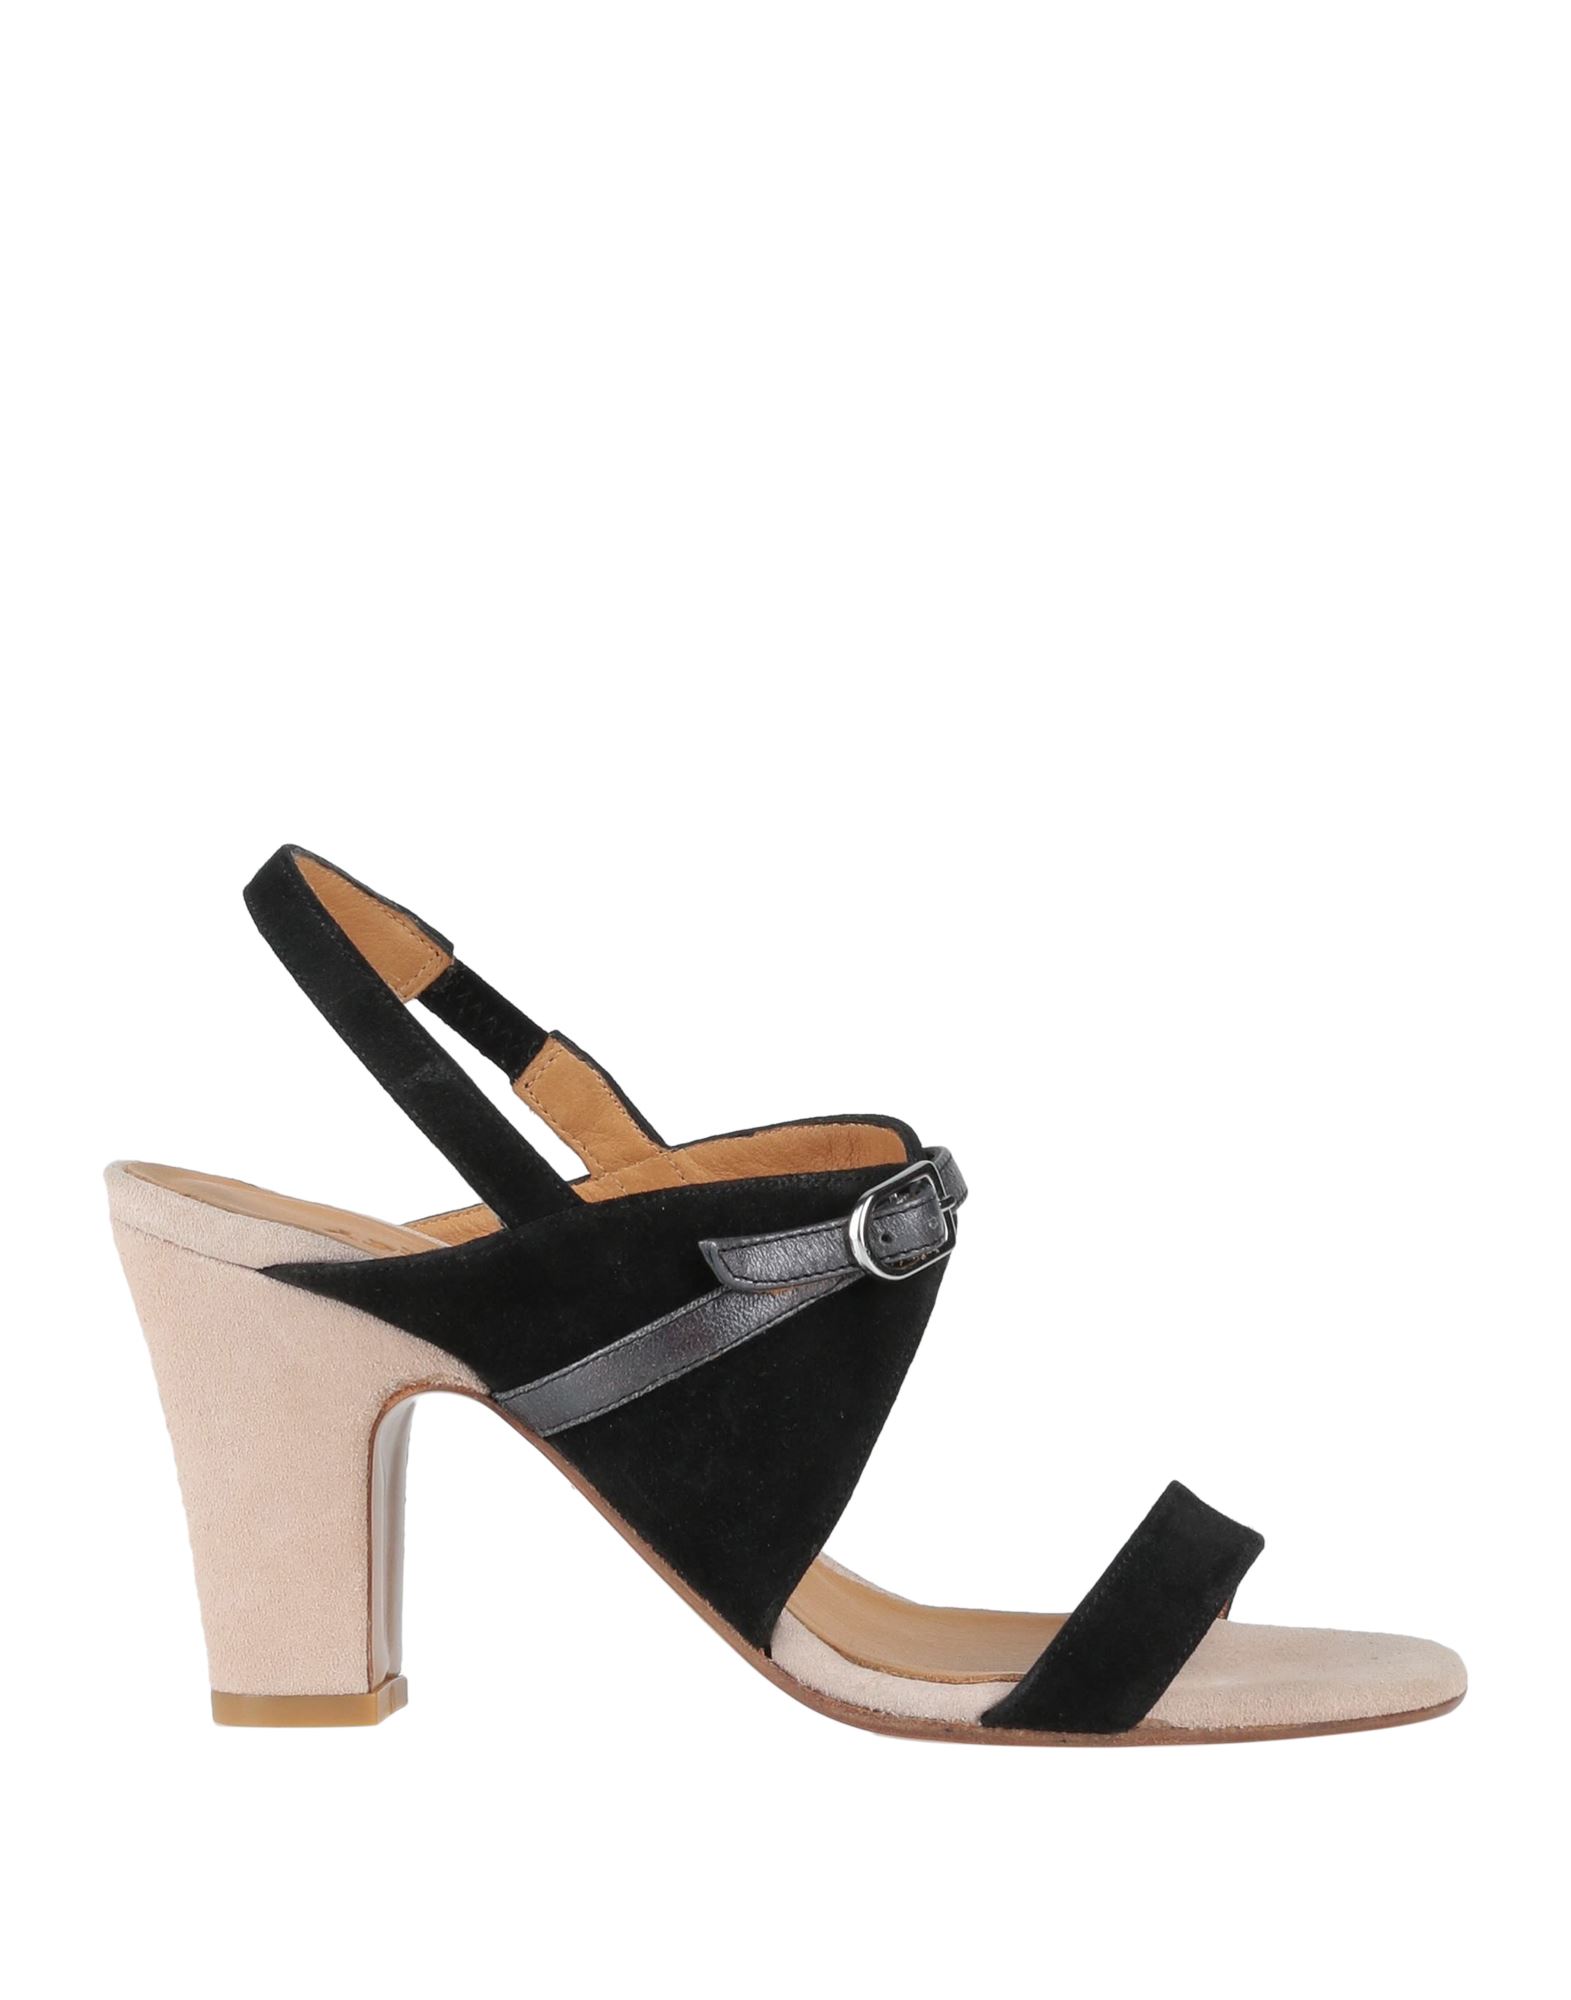 Audley Sandals In Black